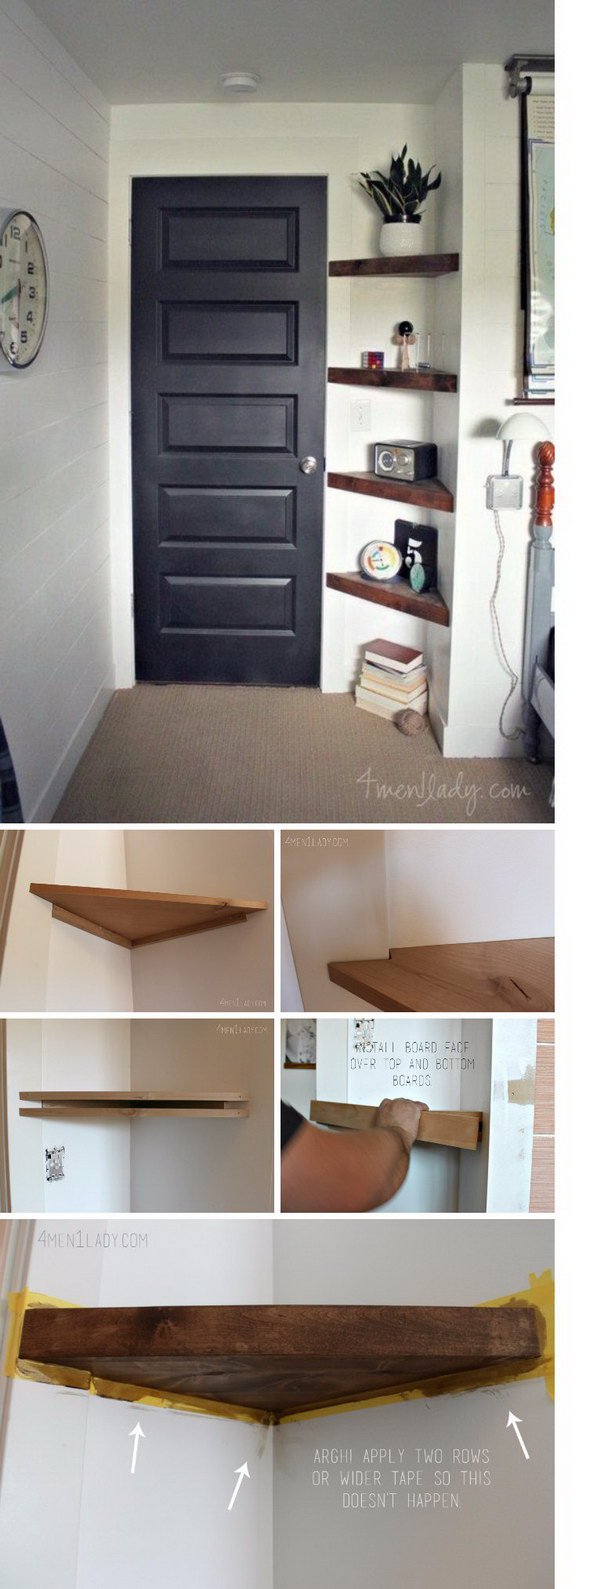 Use Floating Corner Shelves to Create More Storage in an Awkward Small Corner. 